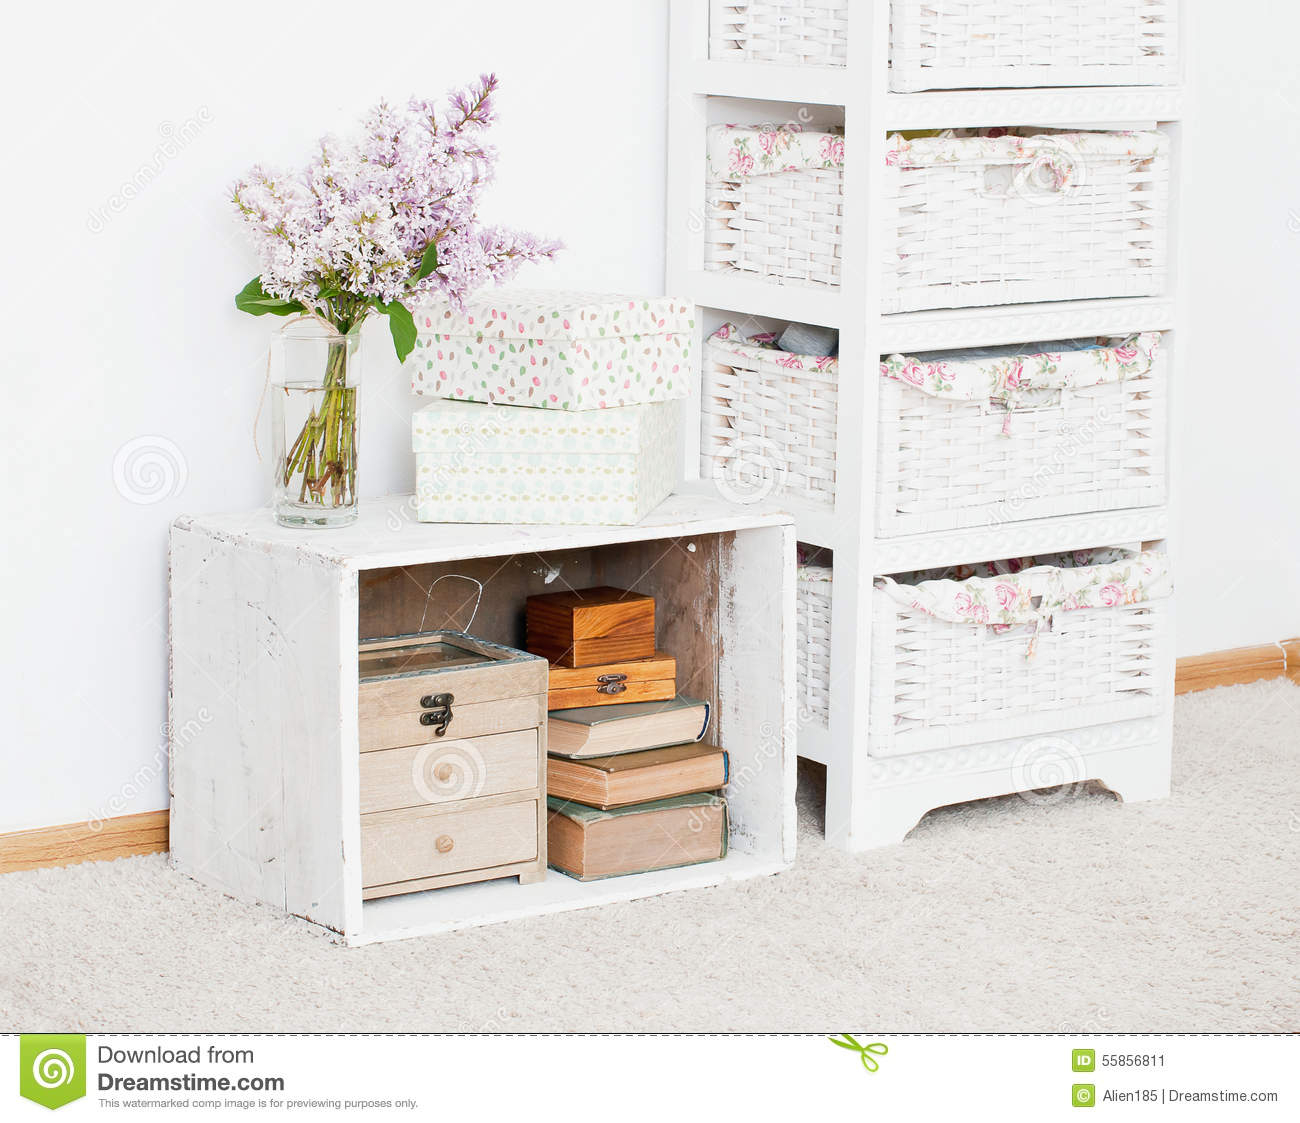 Nightstand With Flowers Storage Boxes And Books Stock Image Image within size 1300 X 1123